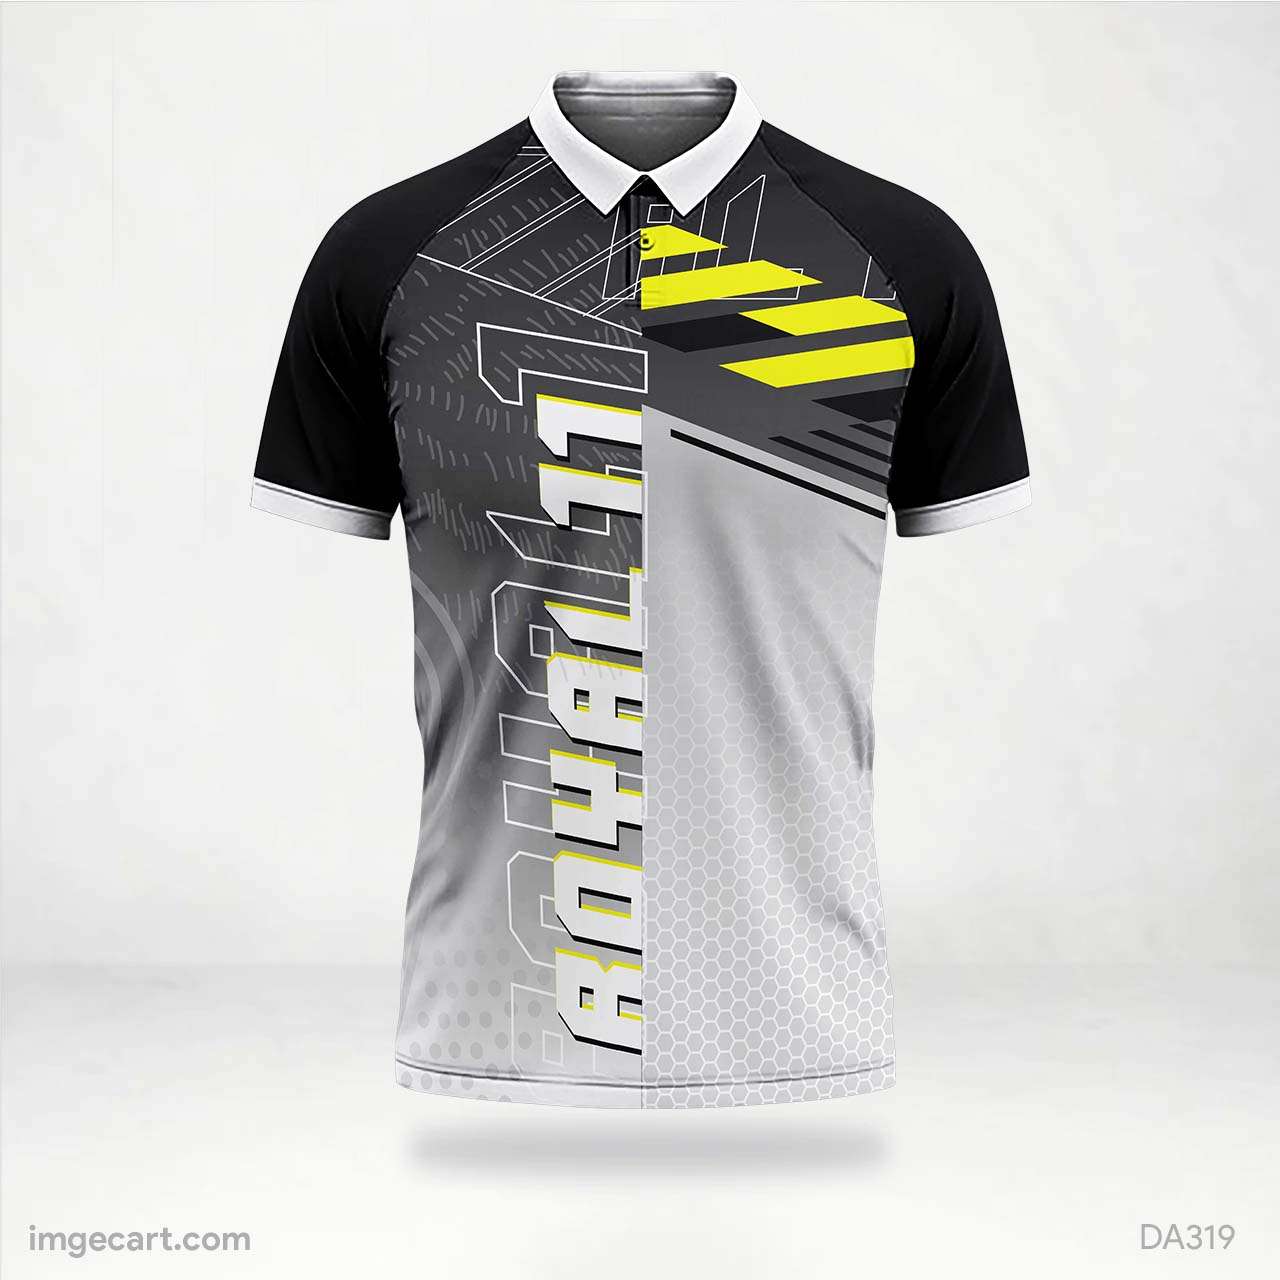 E-sports Jersey Design black and grey with yellow pattern - imgecart